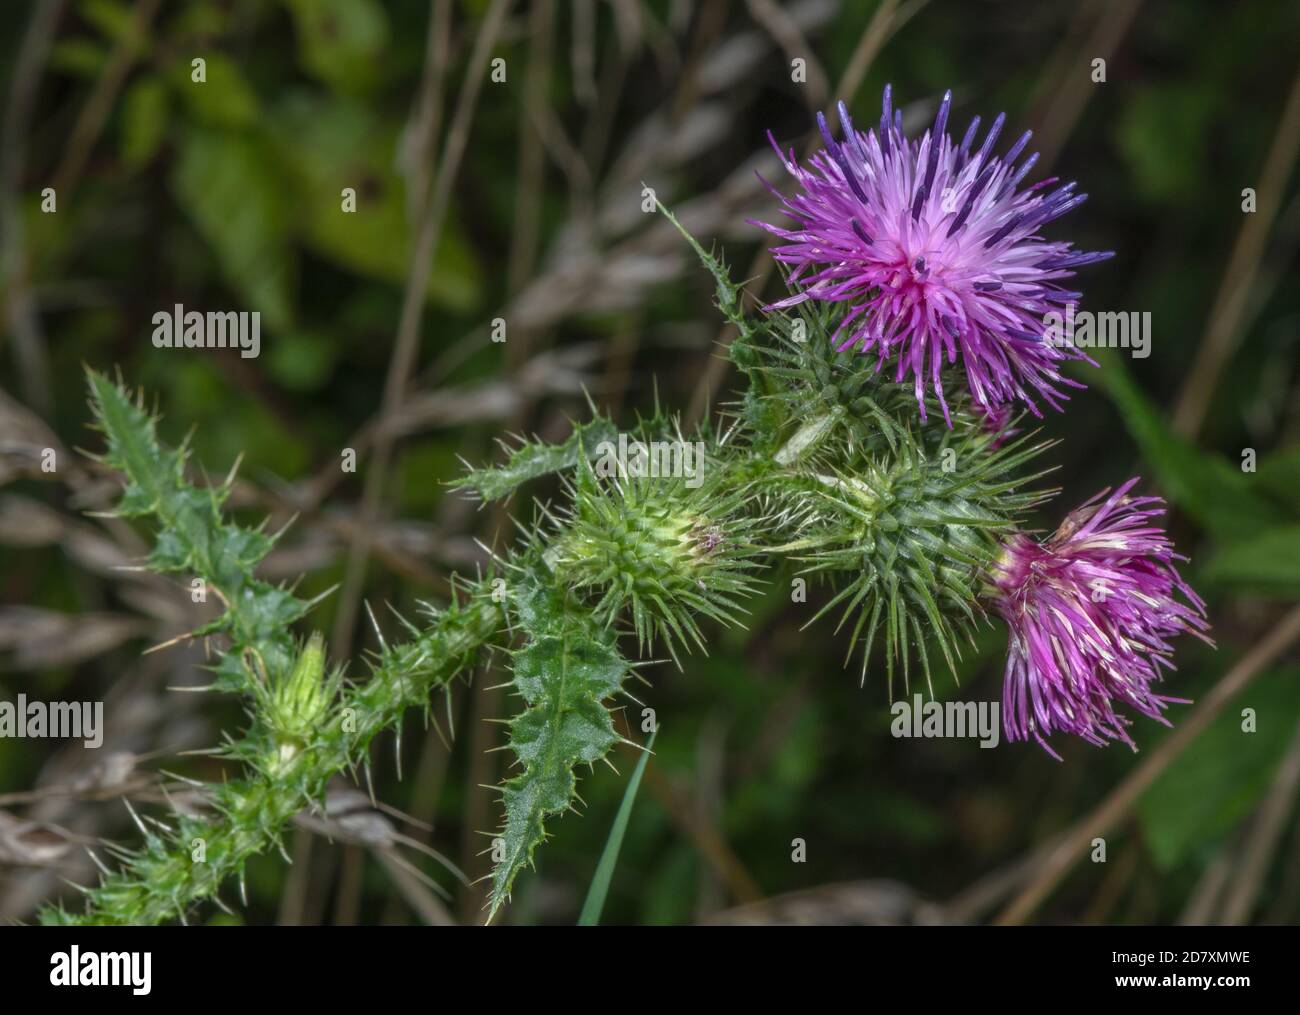 Flowers of Welted thistle, Carduus crispus, in woodland clearing. Stock Photo